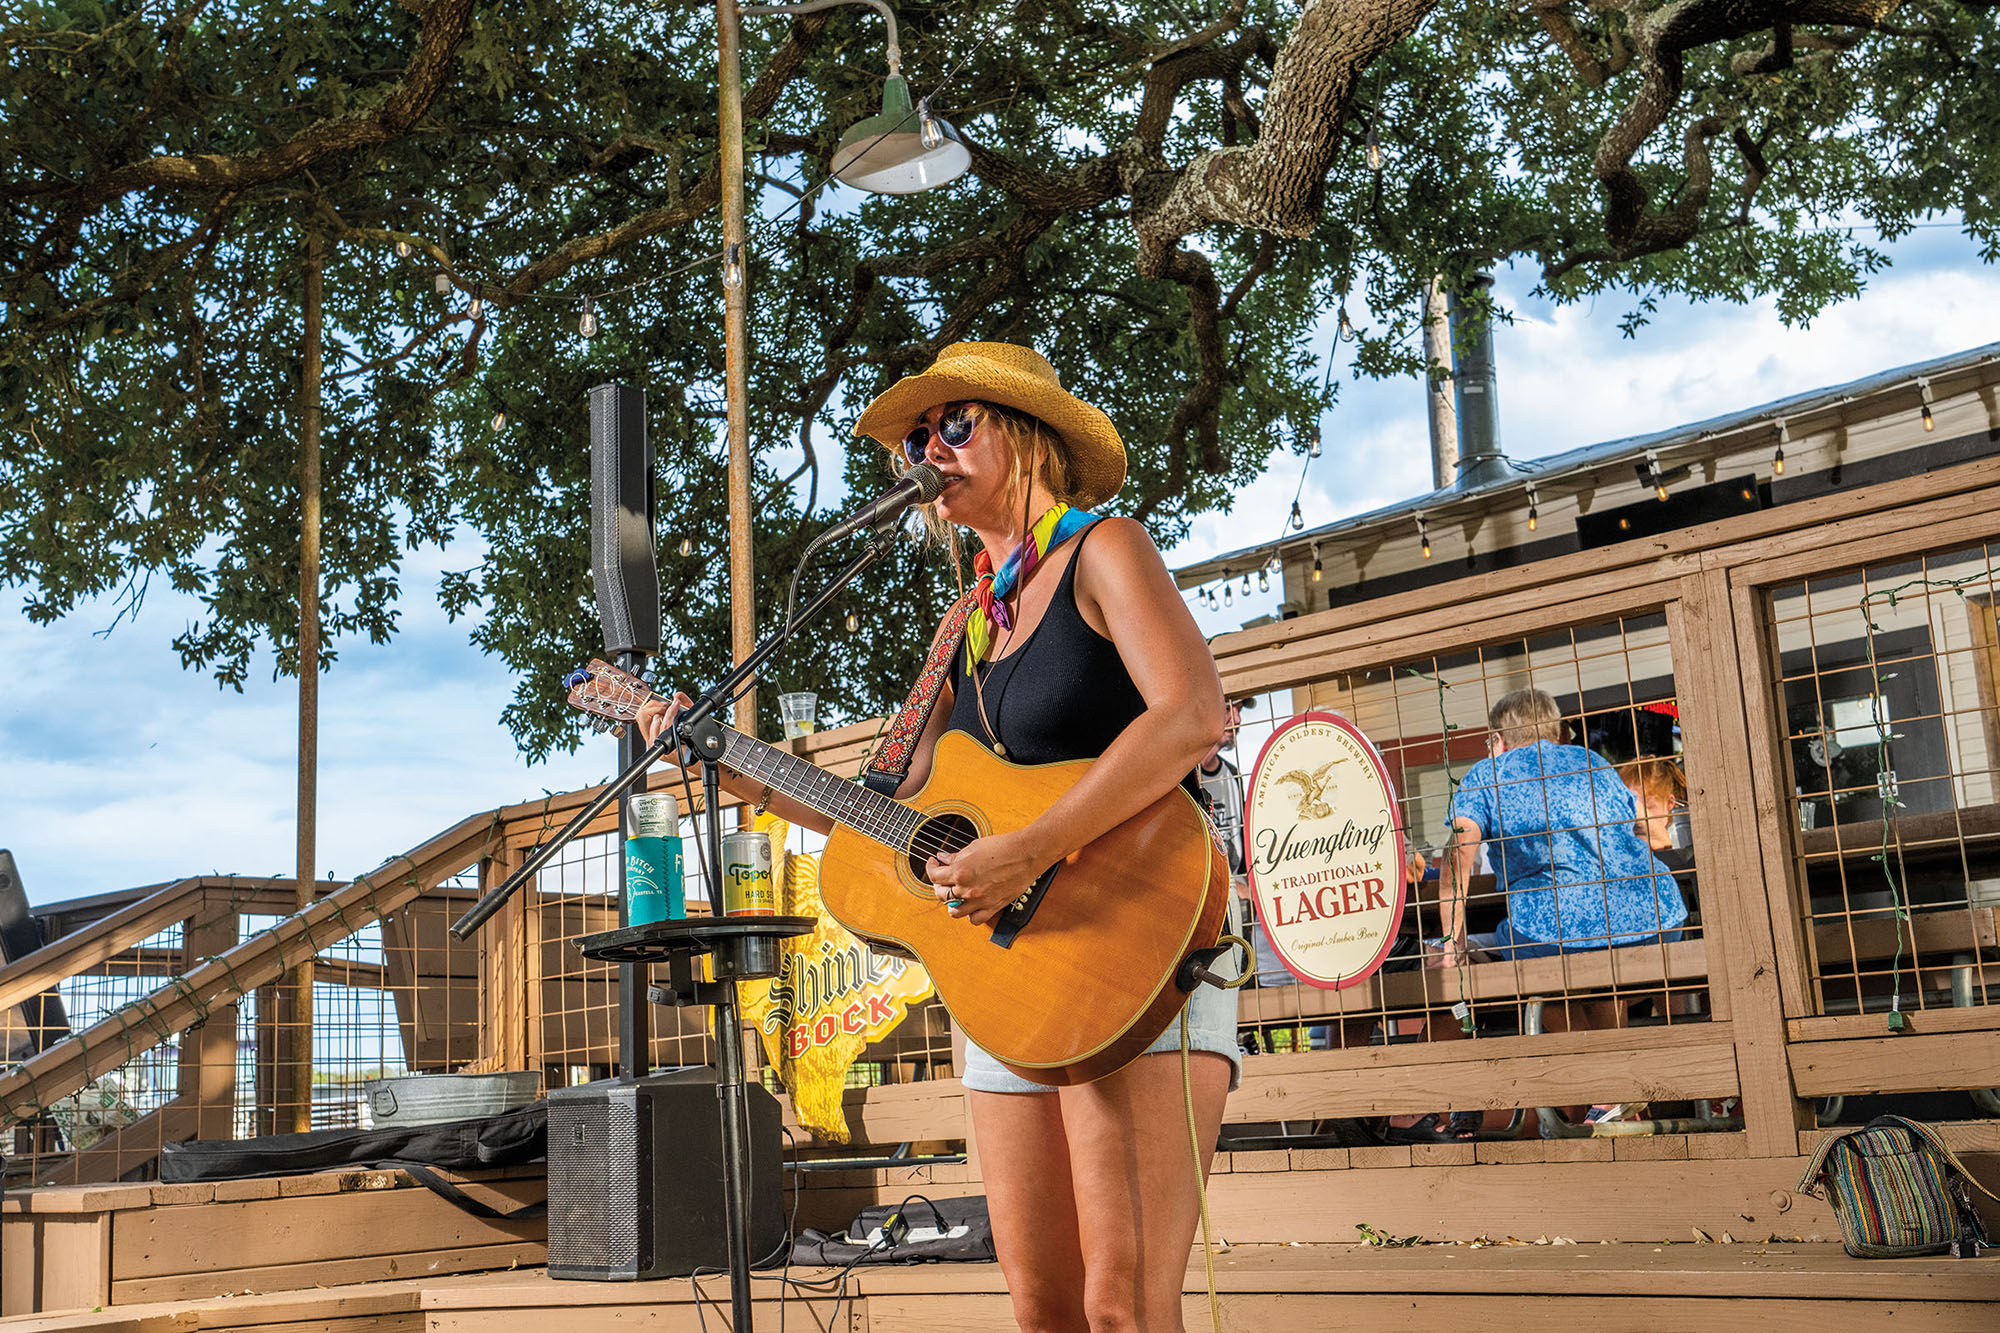 A woman wearing a cowboy hat plays an acoustic guitar on an outdoor stage